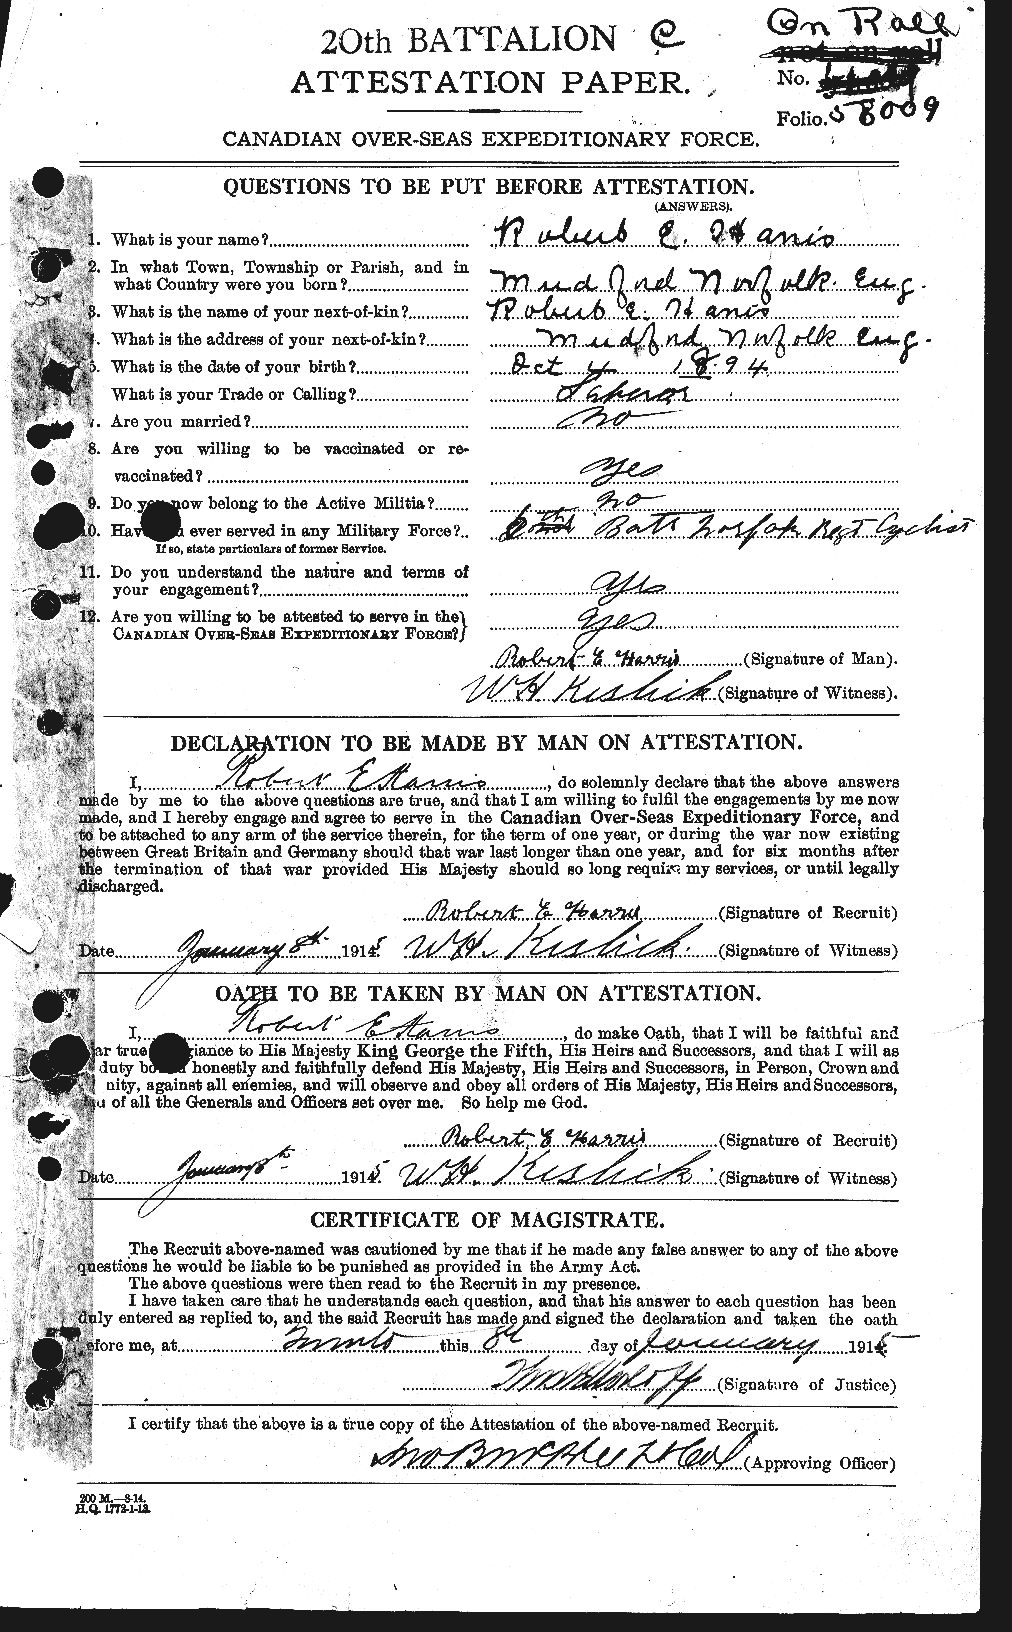 Personnel Records of the First World War - CEF 378153a